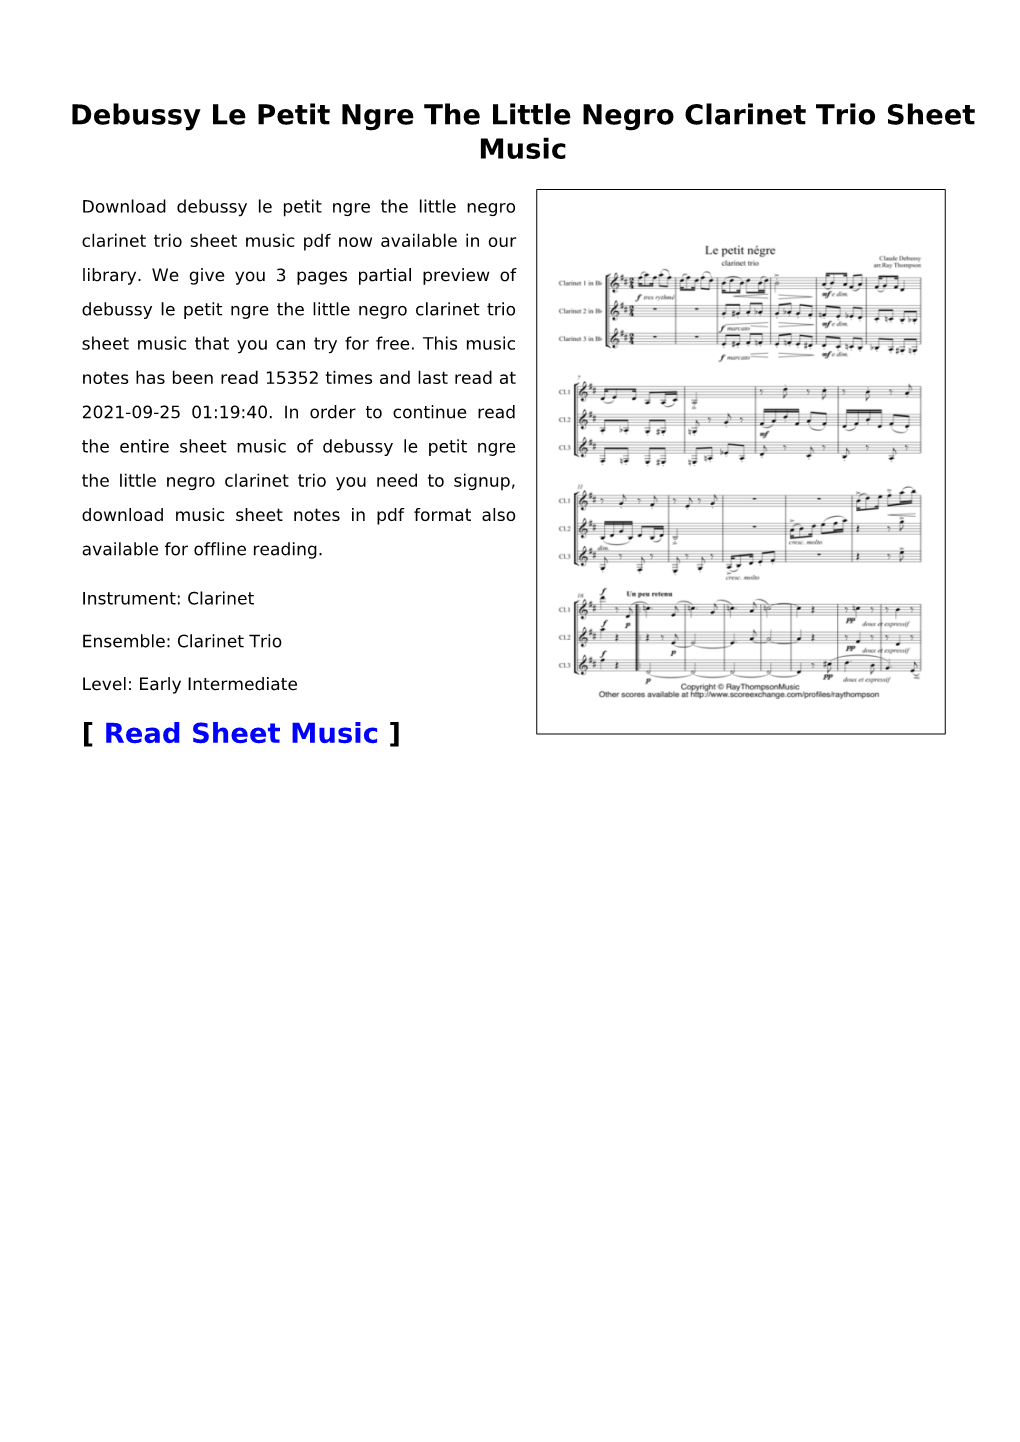 Debussy Le Petit Ngre the Little Negro Clarinet Trio Sheet Music